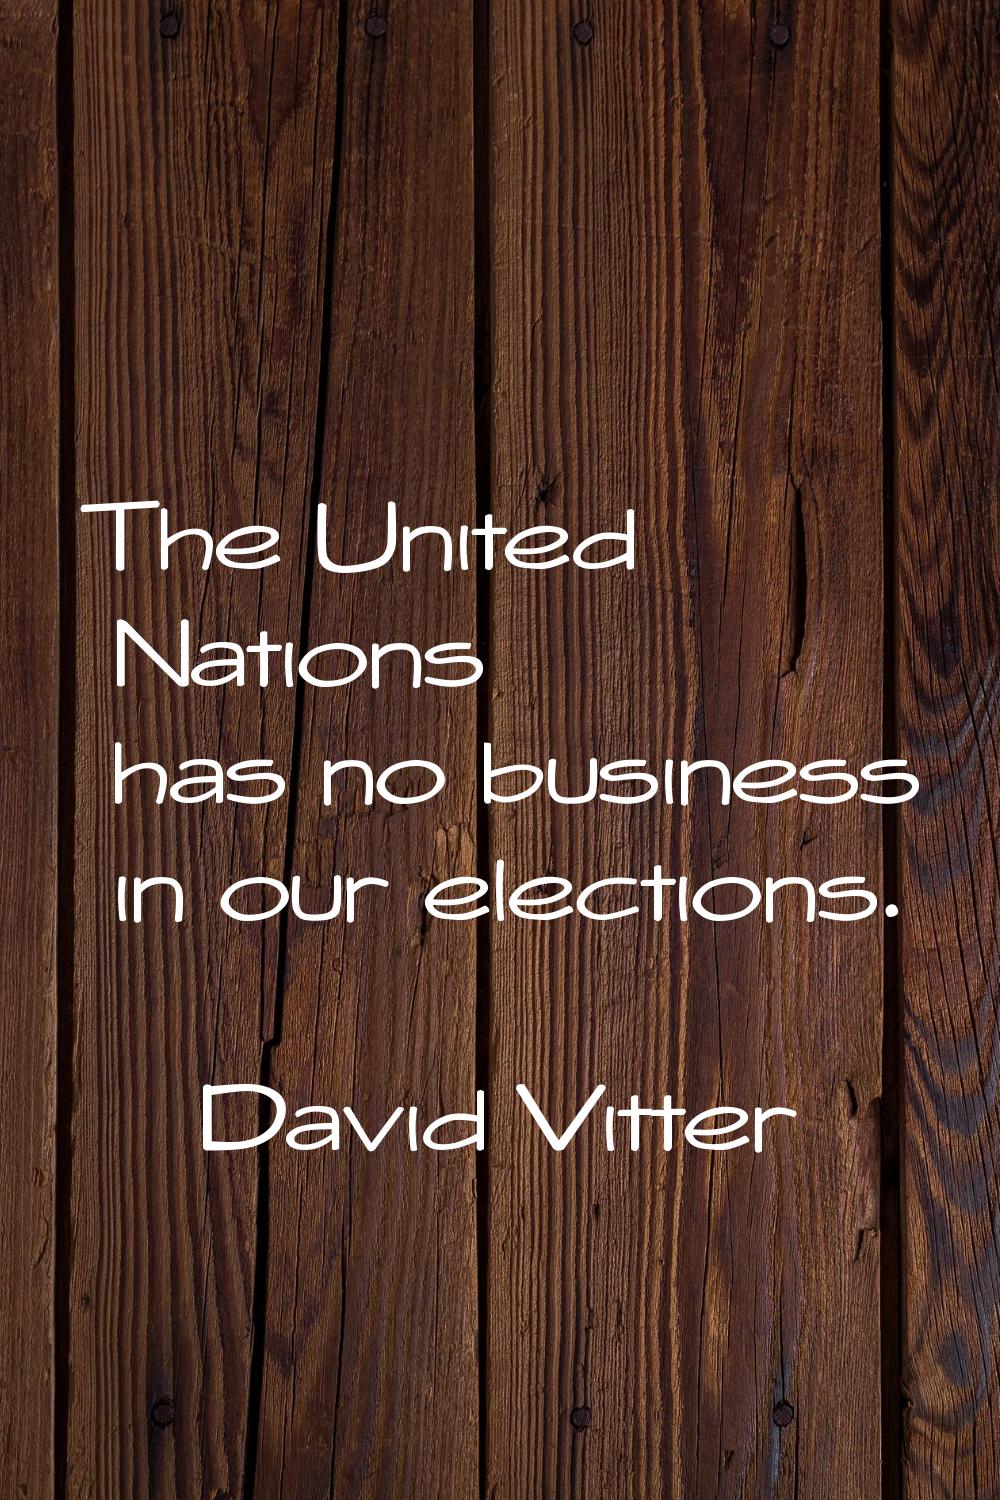 The United Nations has no business in our elections.